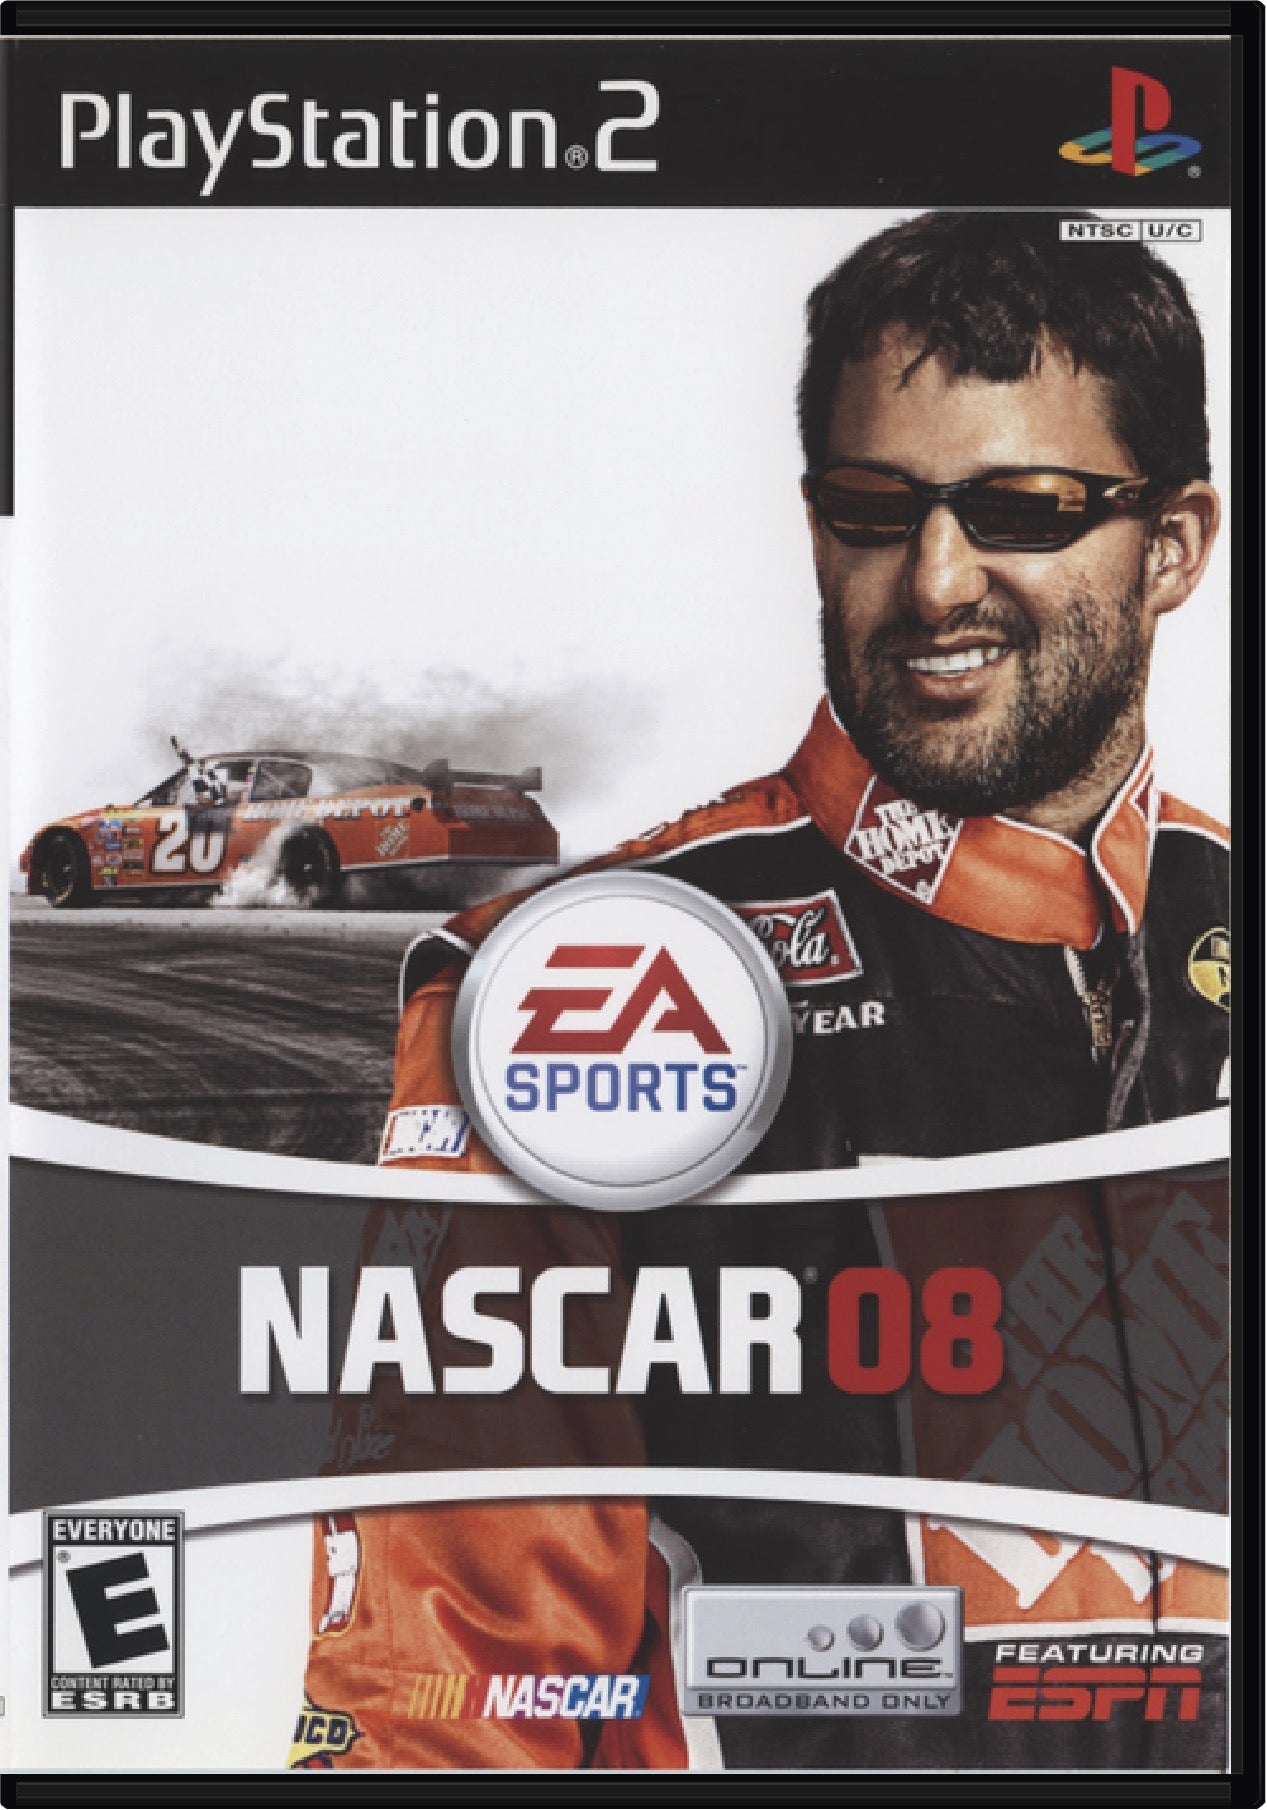 NASCAR 08 Cover Art and Product Photo